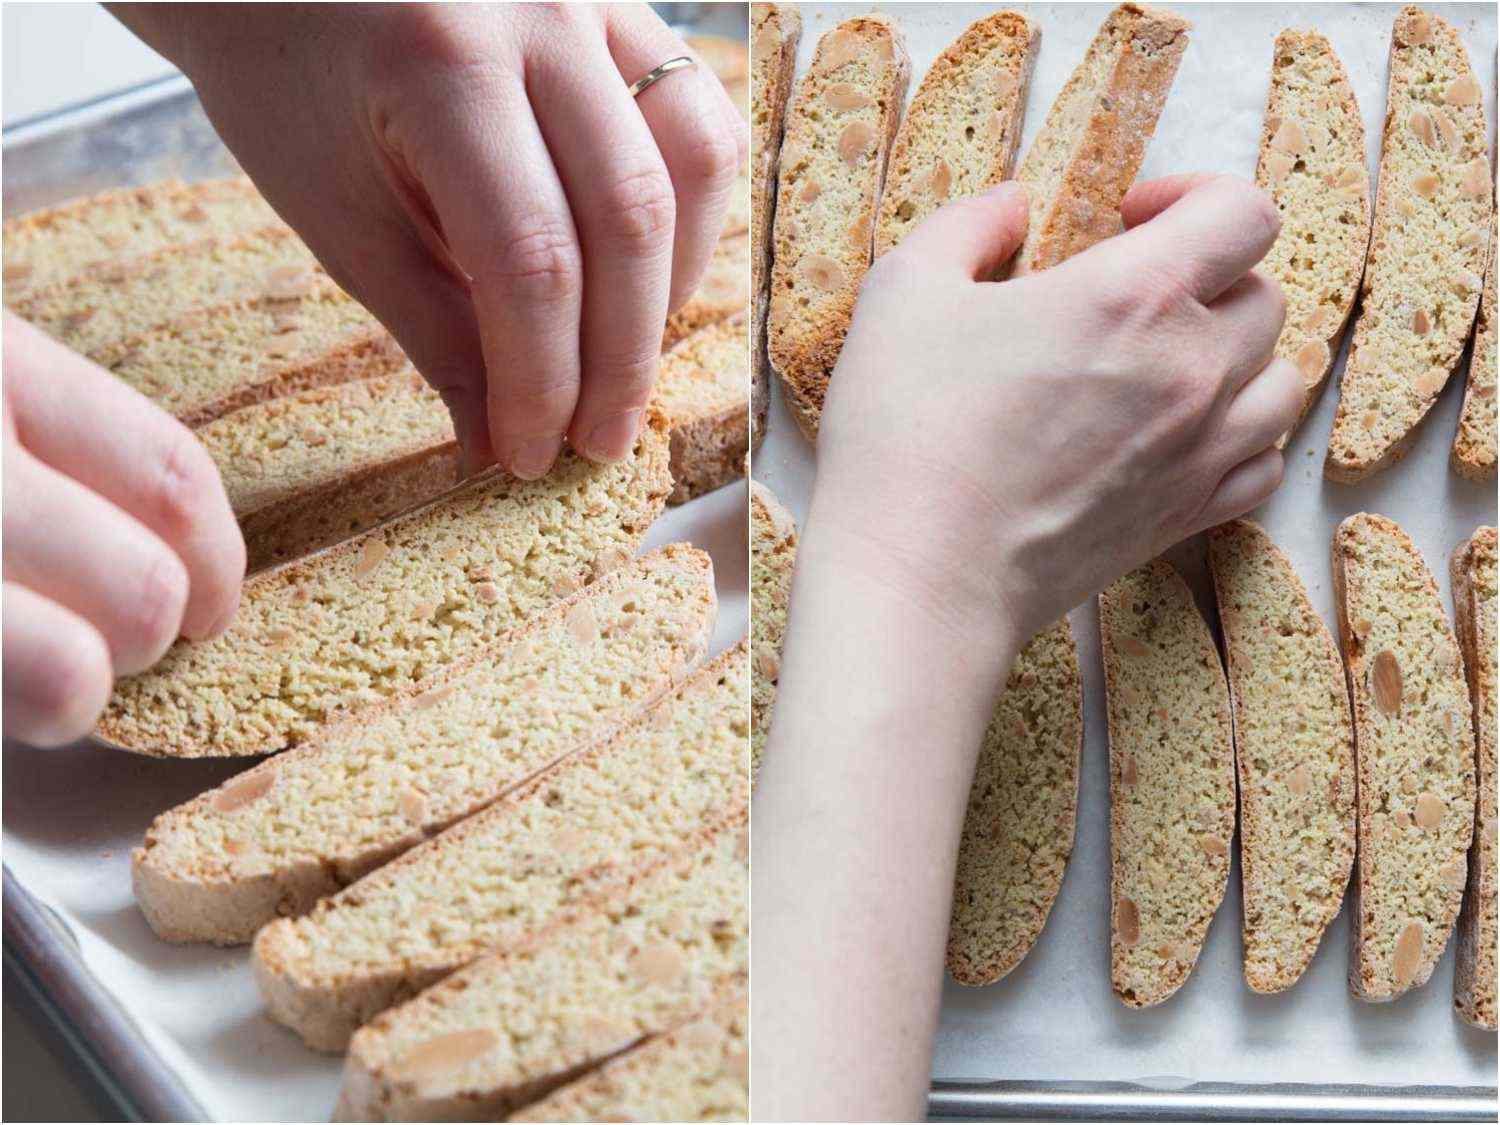 Flipping the biscotti to bake the other side